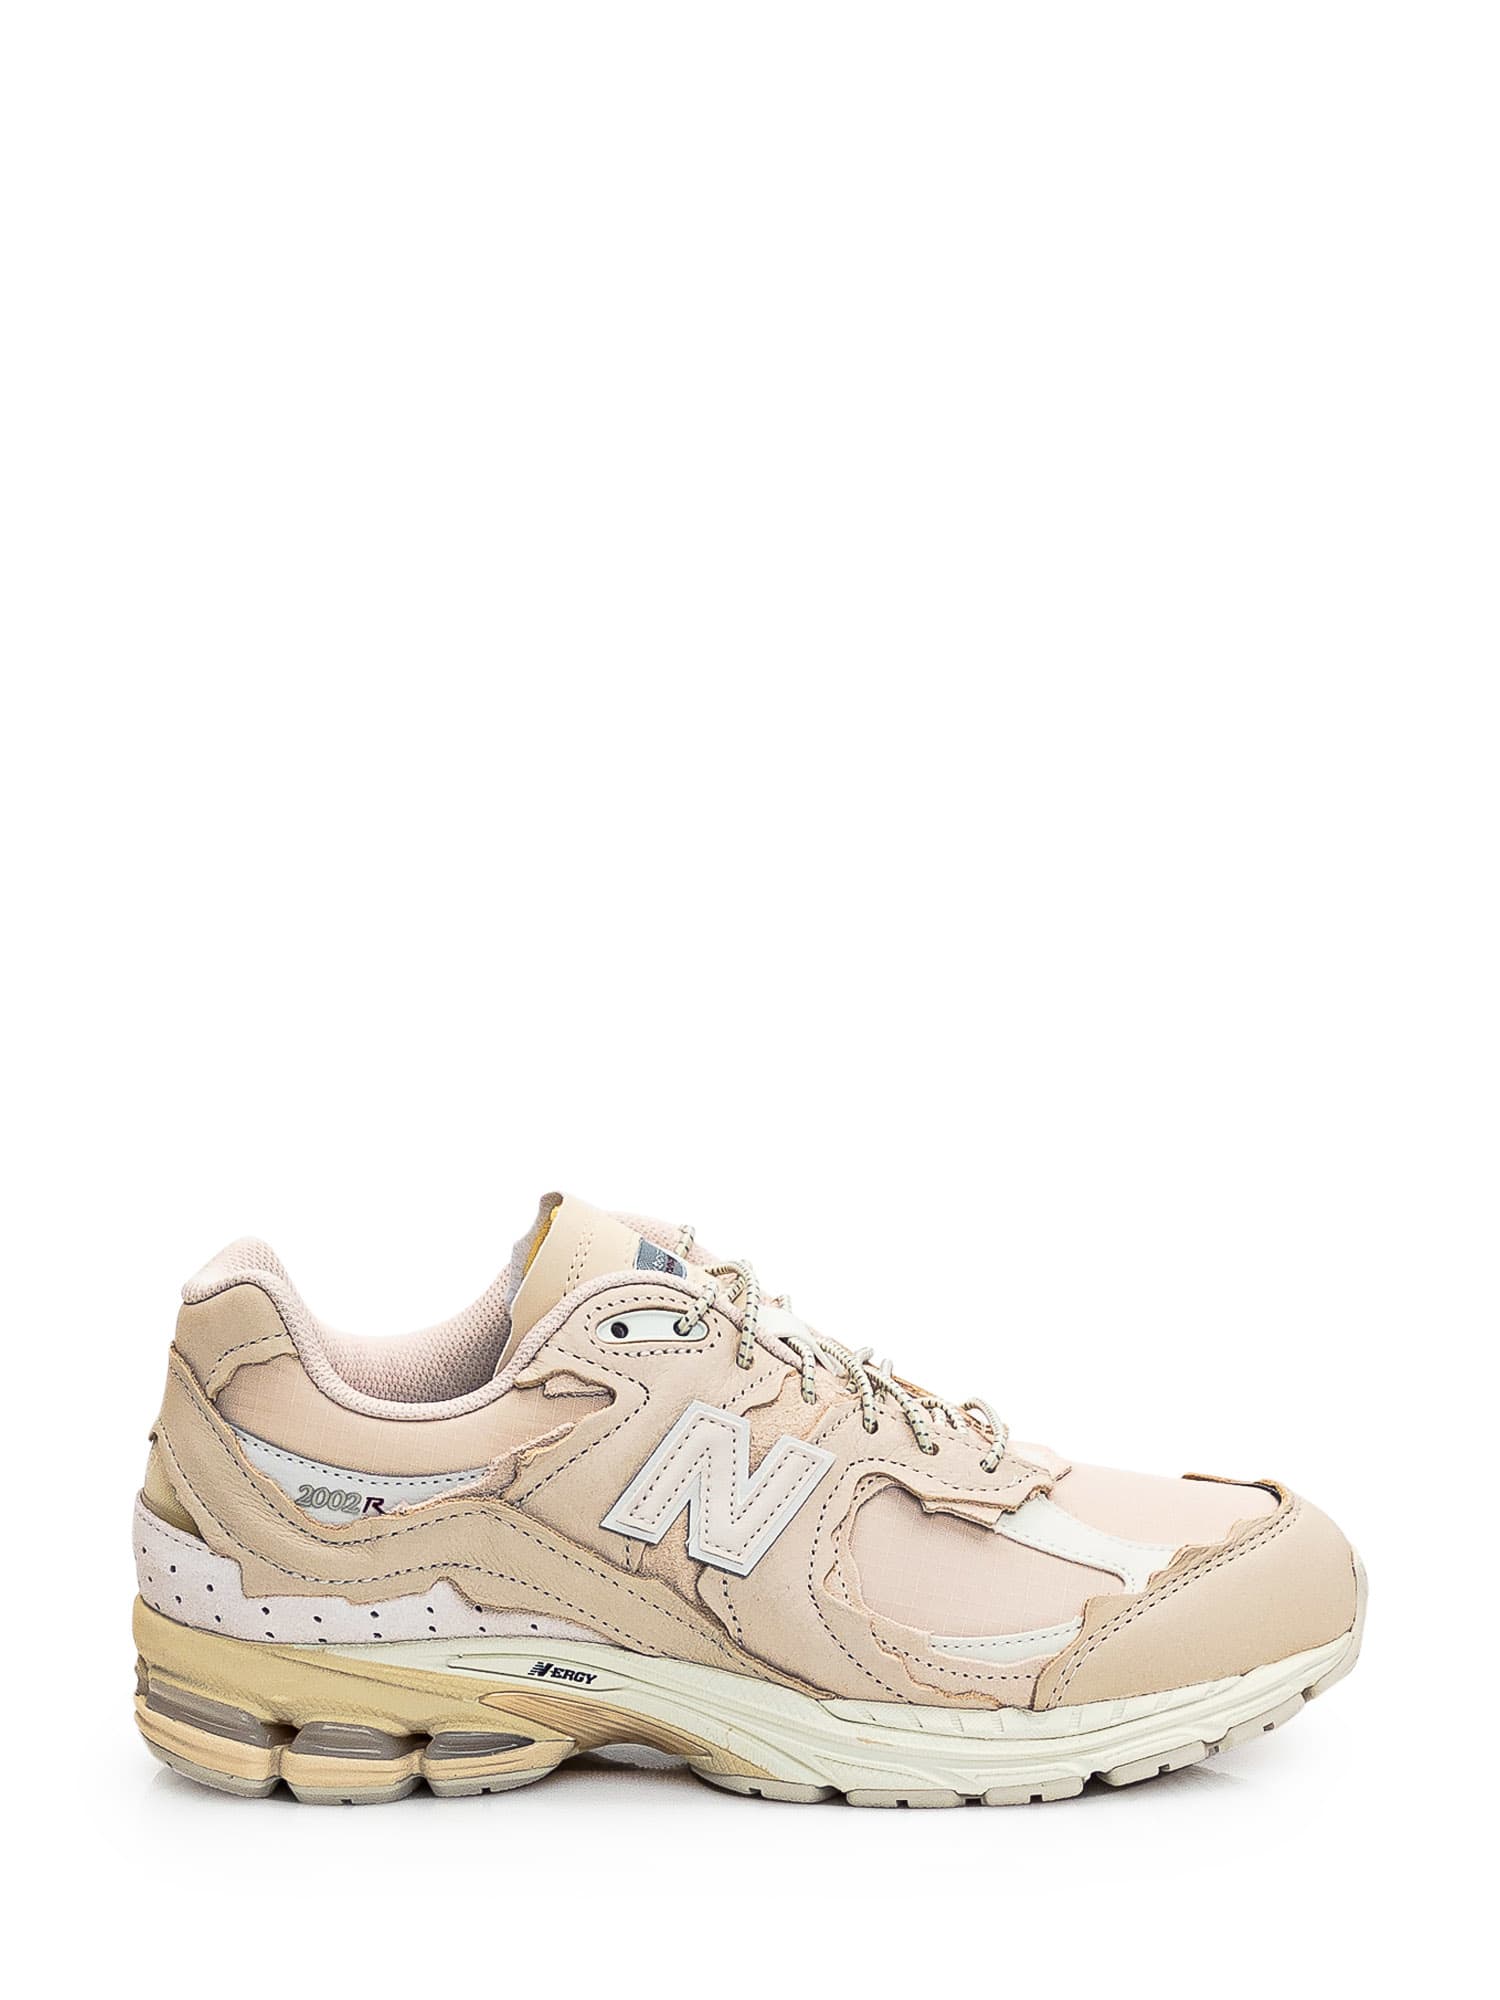 Shop New Balance Sneaker 2002r In Sand Stone